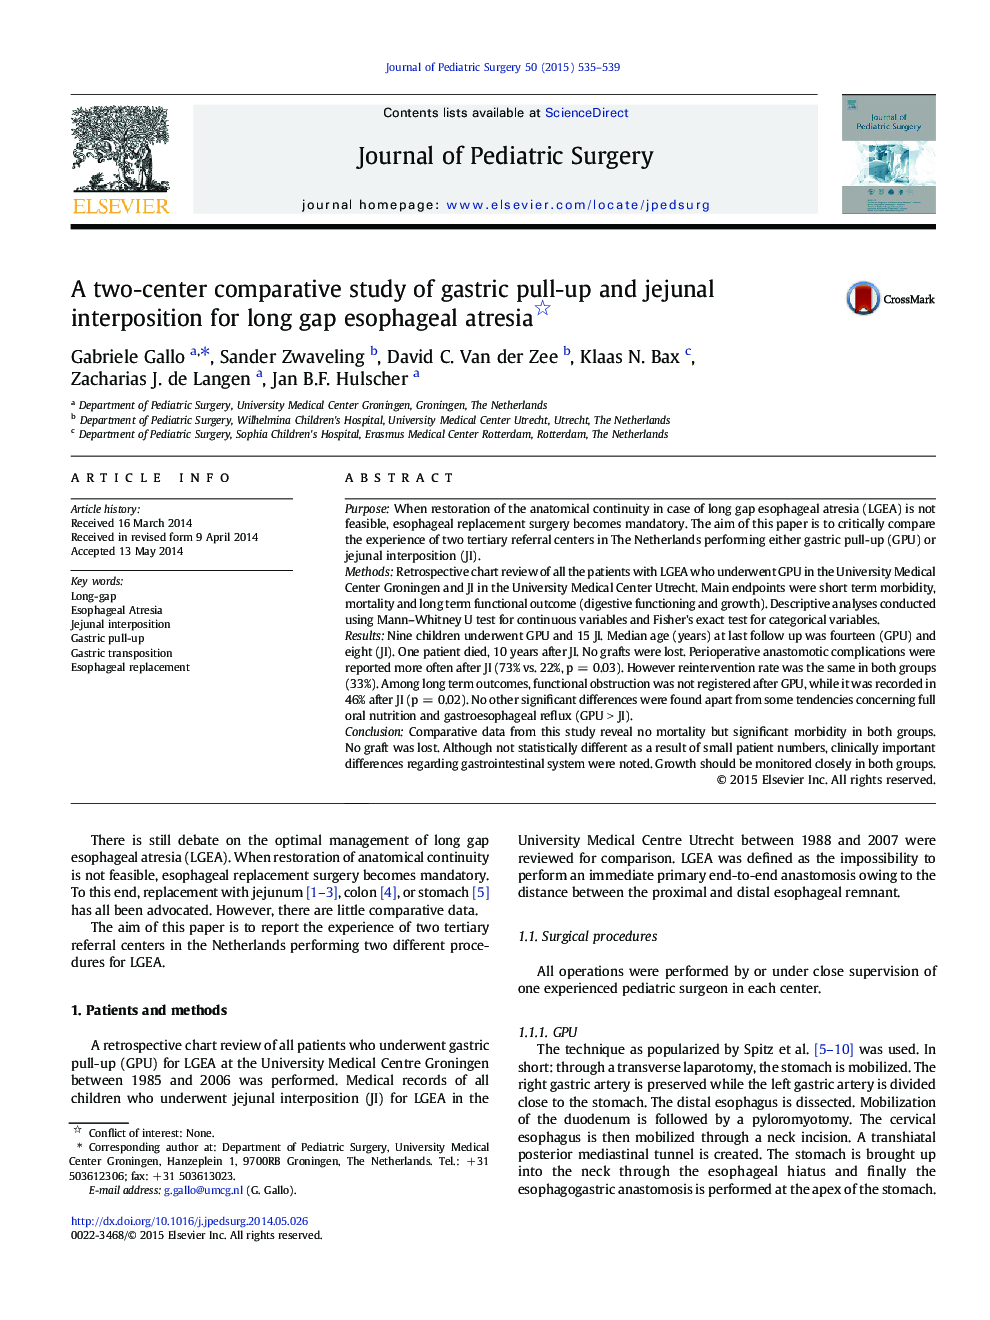 A two-center comparative study of gastric pull-up and jejunal interposition for long gap esophageal atresia